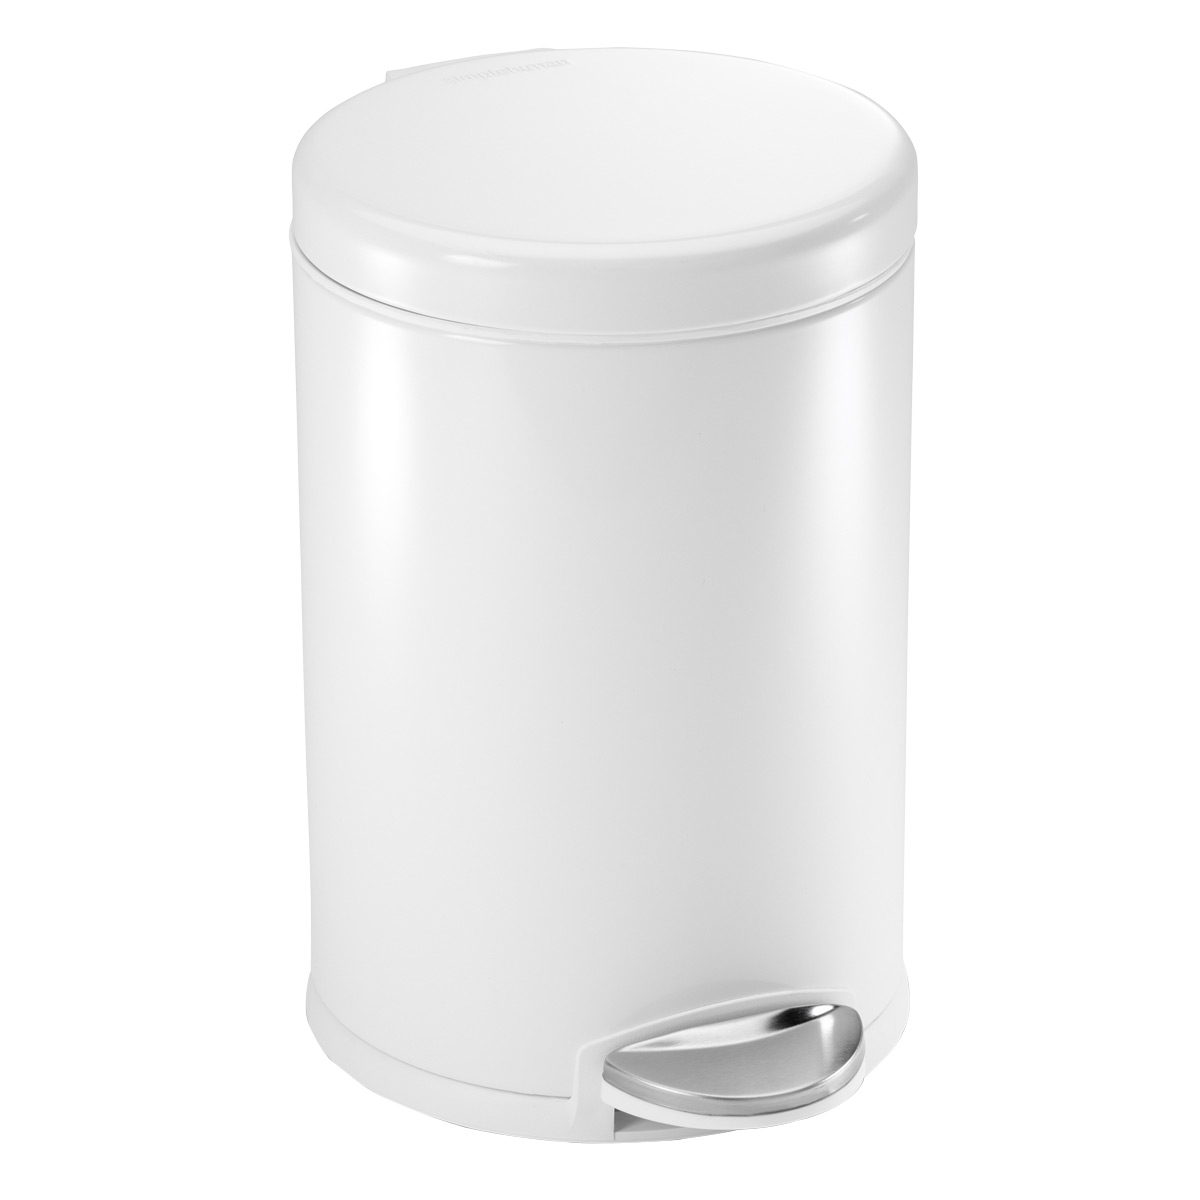 https://www.containerstore.com/catalogimages/378228/10050005-simplehuman-white-1.2gal-ro.jpg